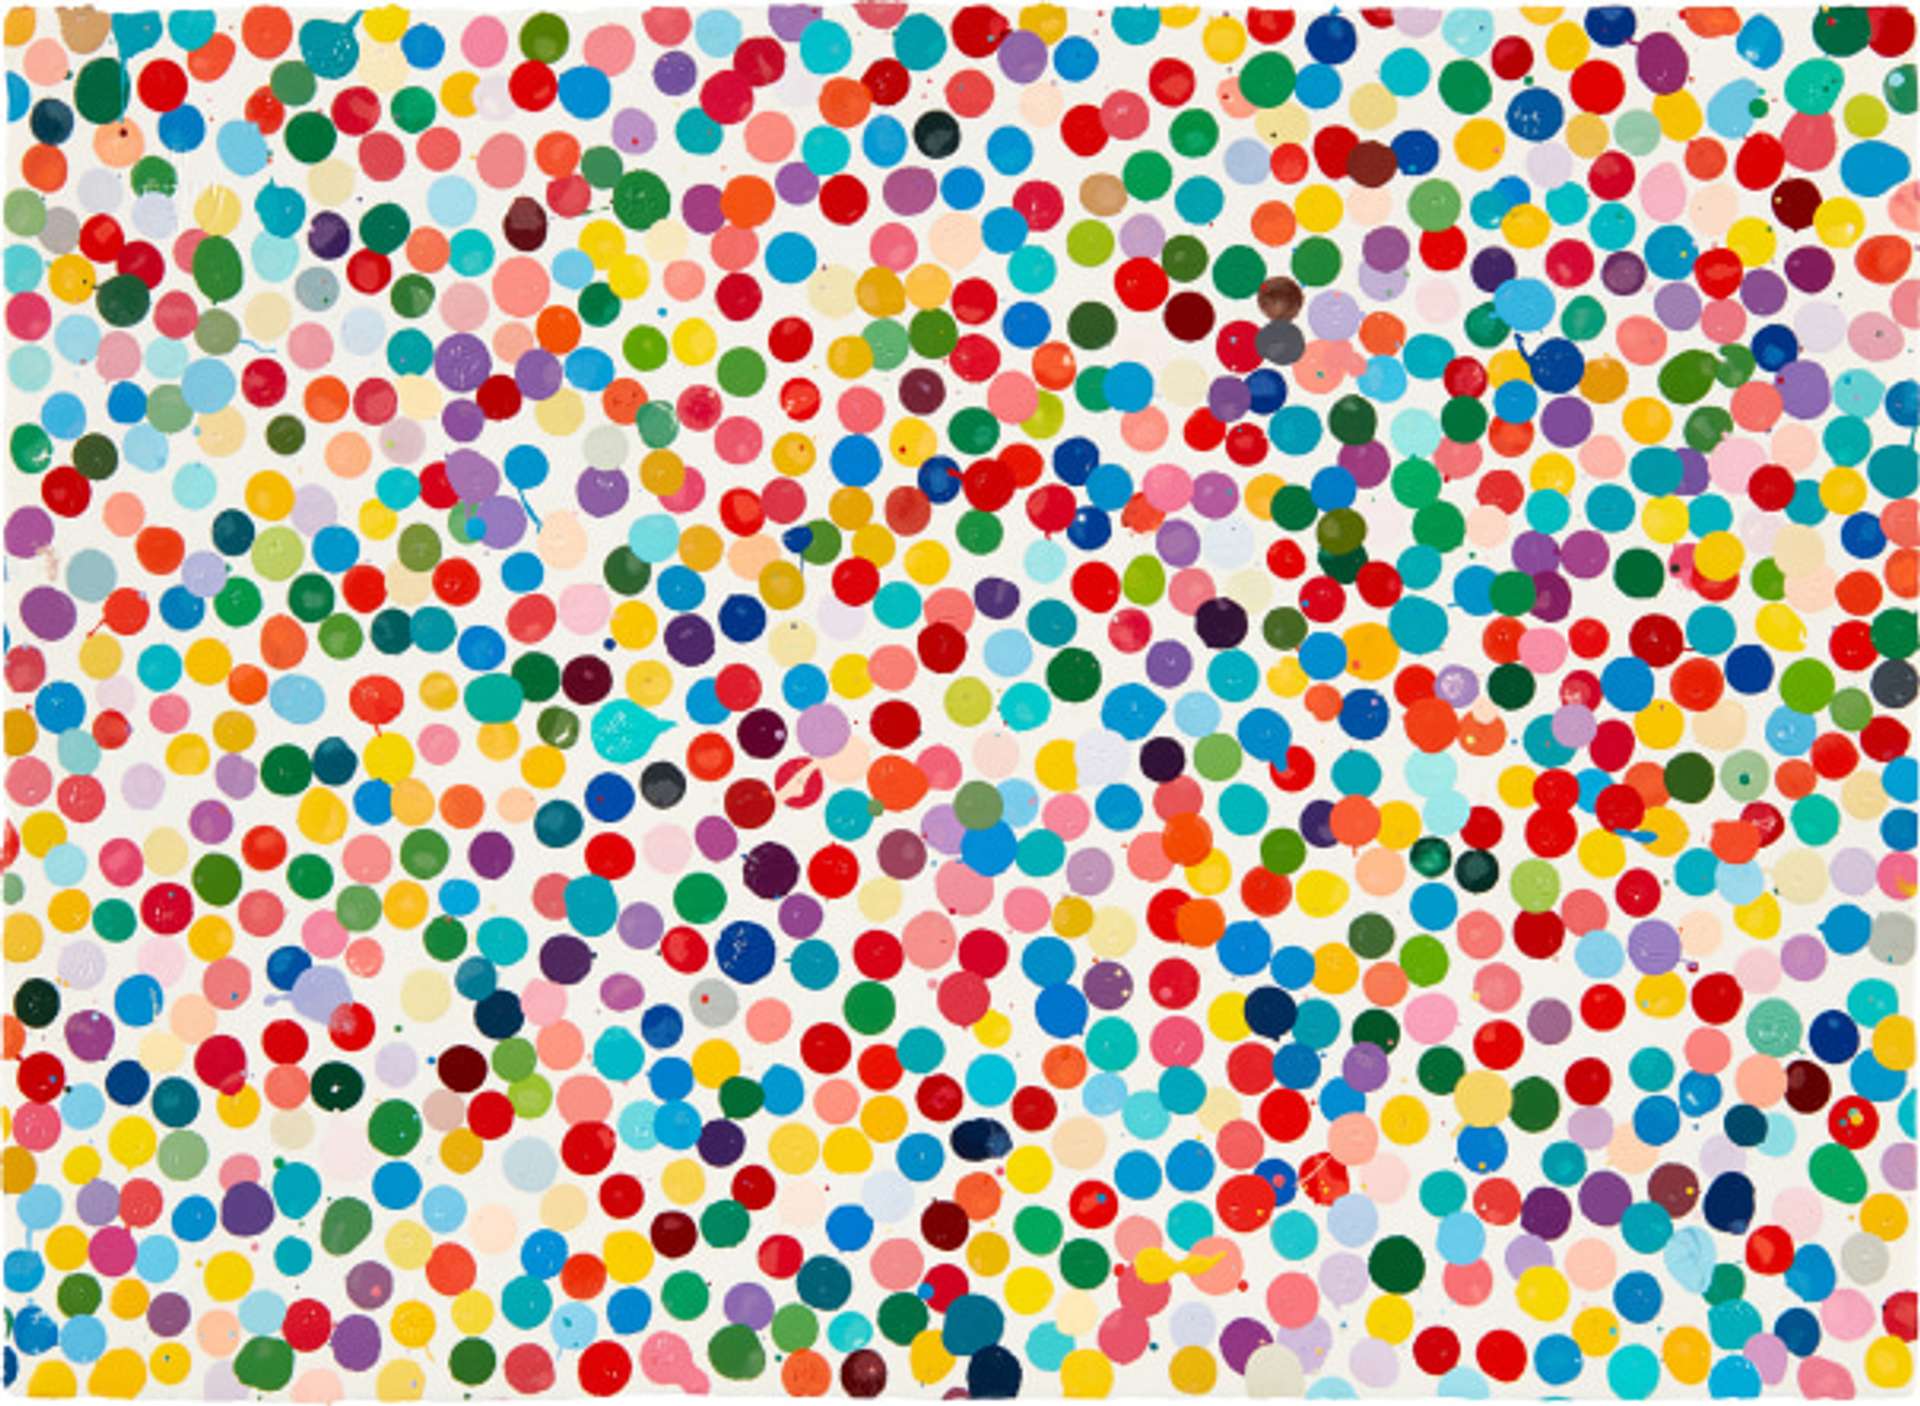 Small multi-coloured dots painted on a white background.